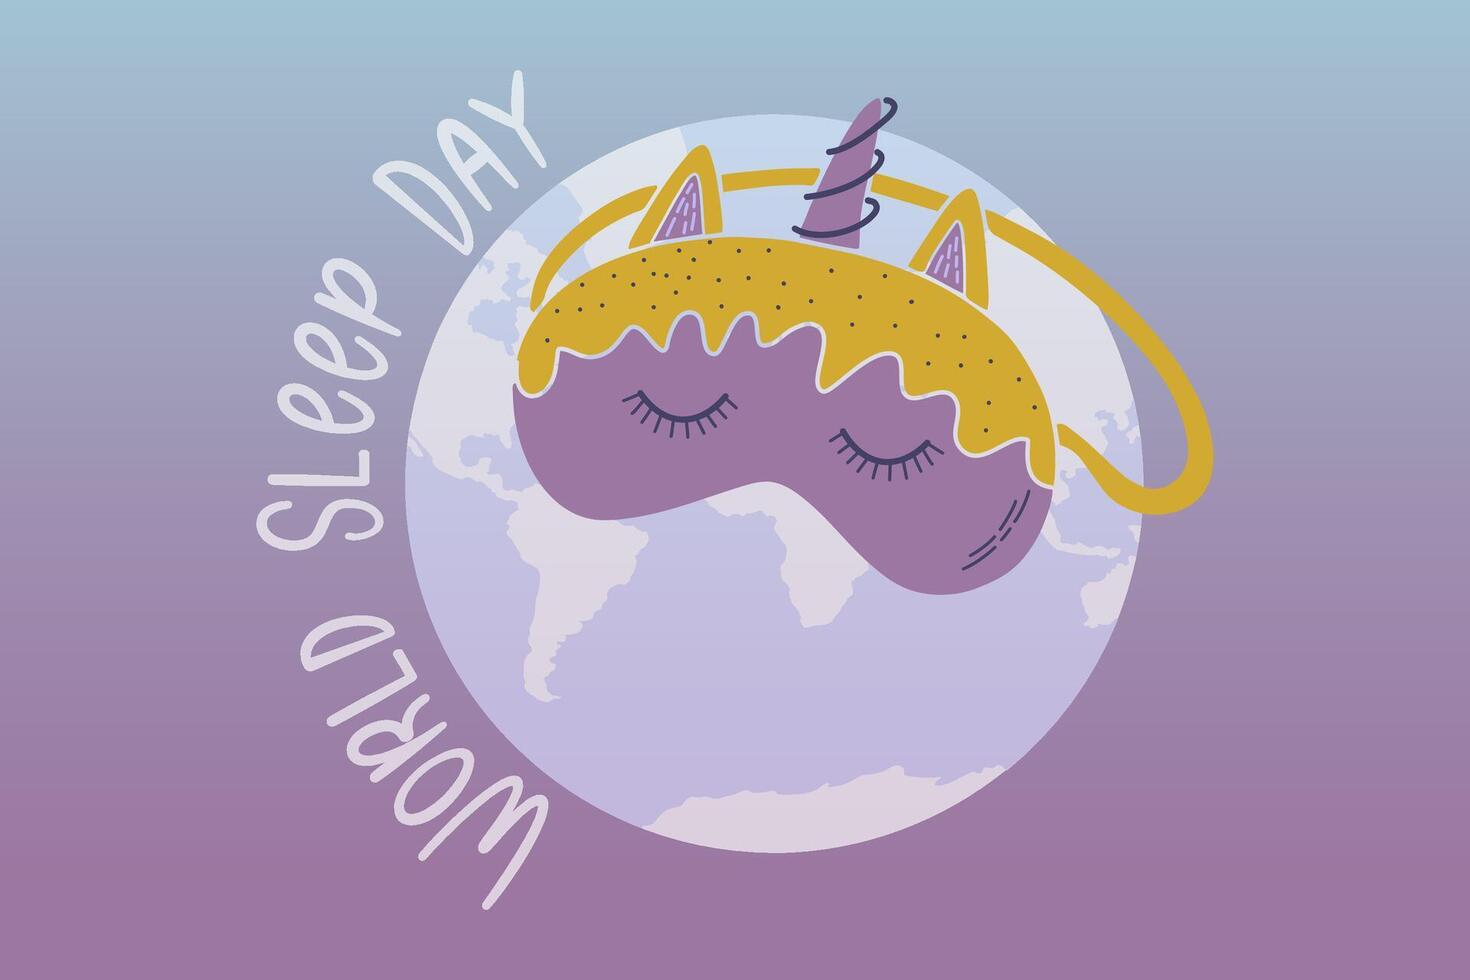 World Sleep Day. Gradient background with globe and cute sleeping mask. Flat style vector illustration for card, banner, poster.